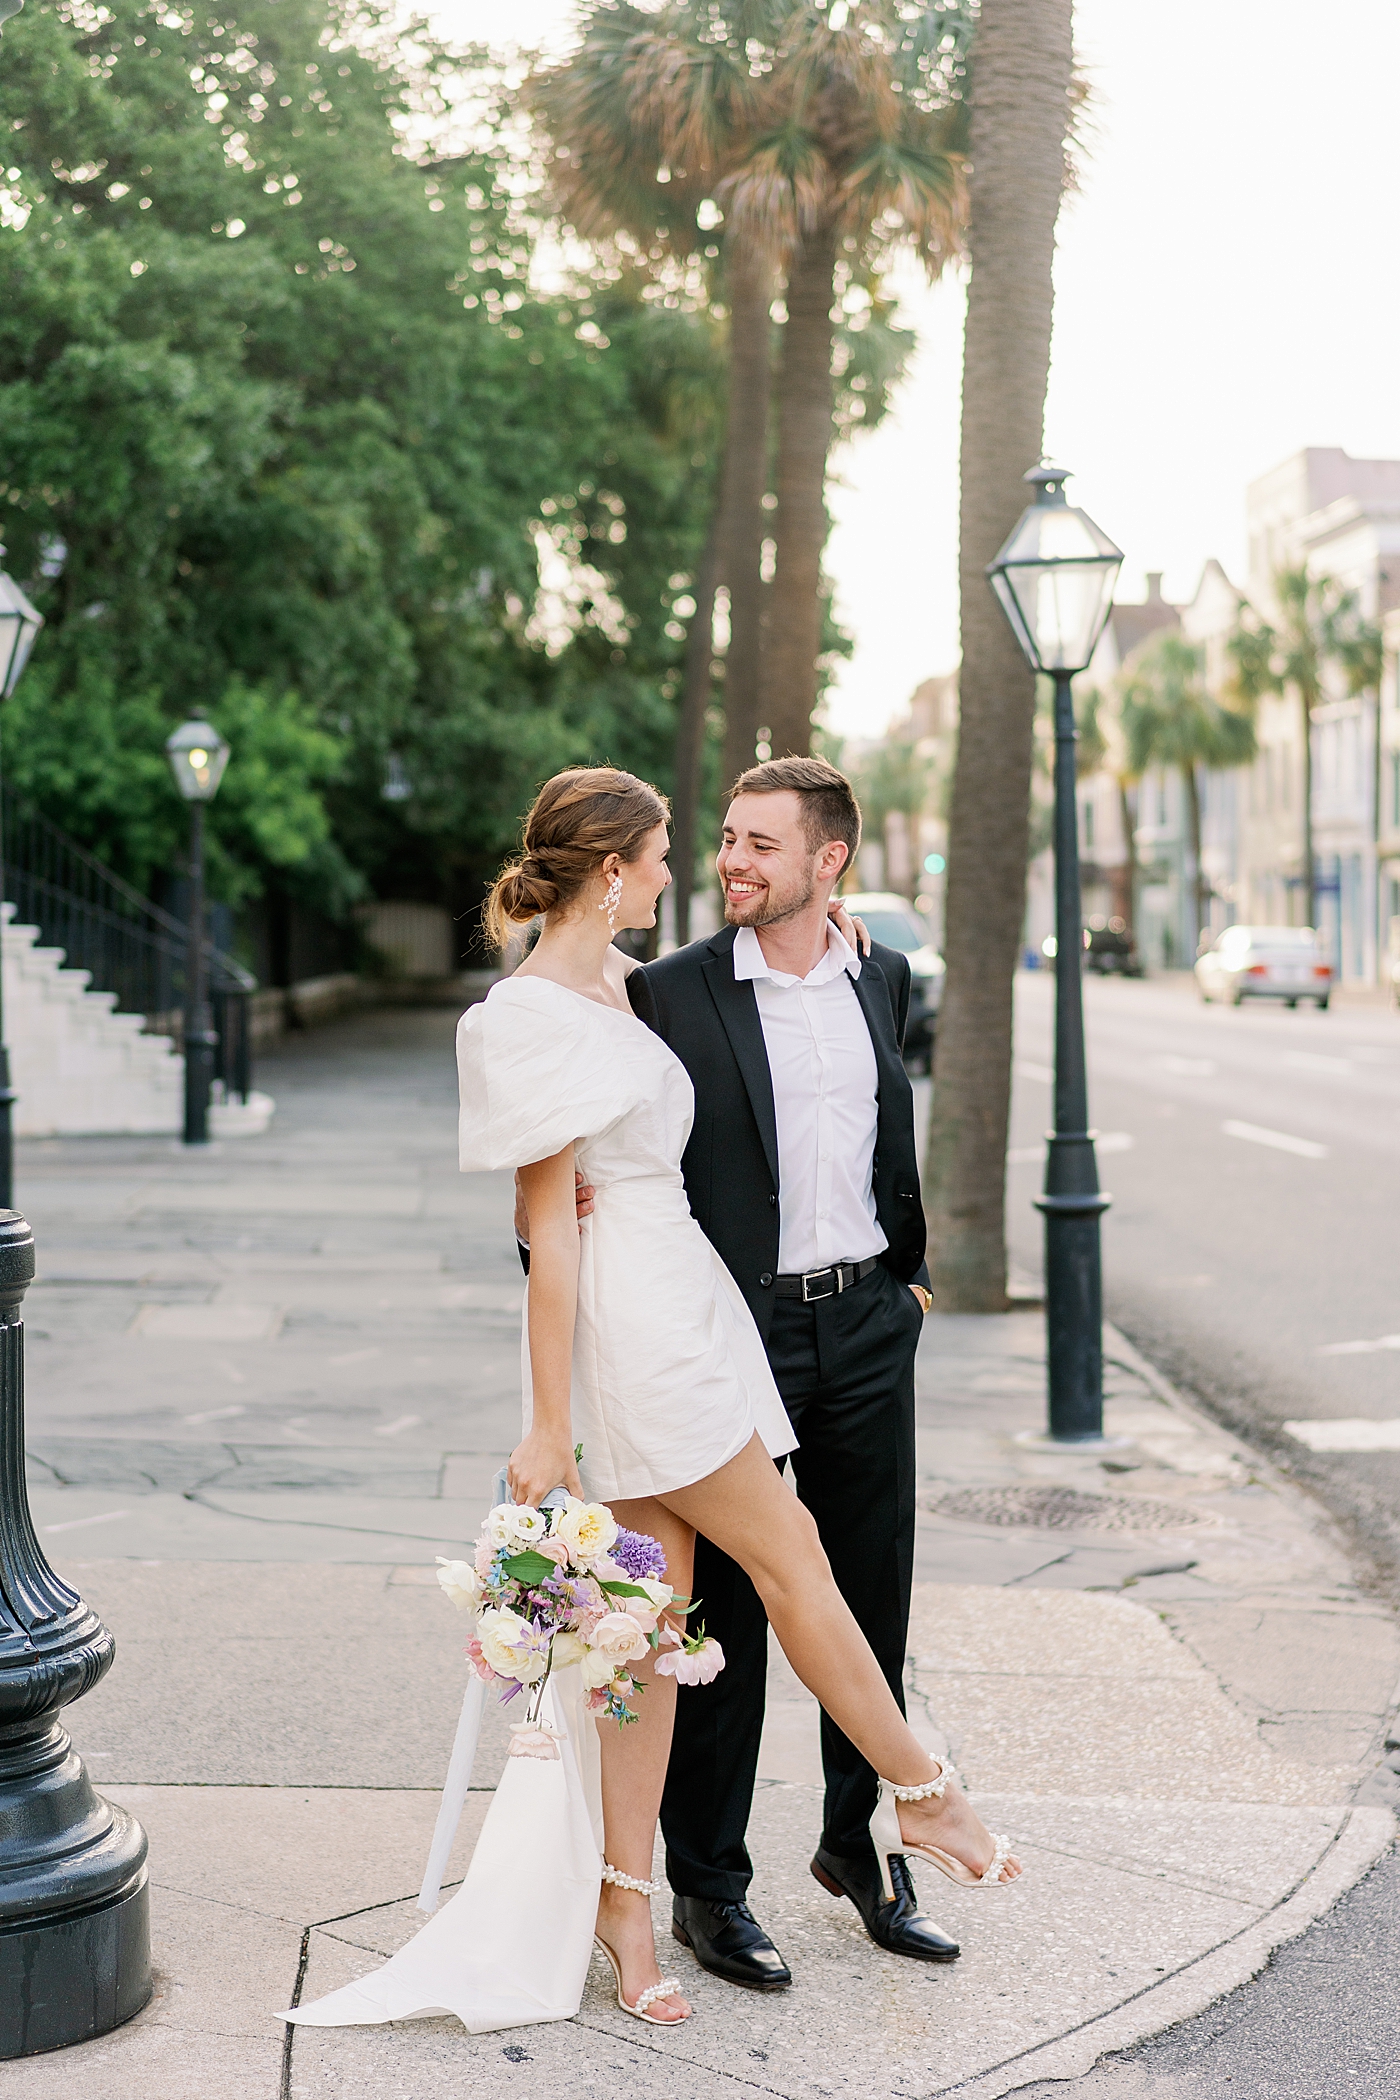 Bride and groom at crosswalk during Elevated City Hall Elopement | Images by Annie Laura Photo